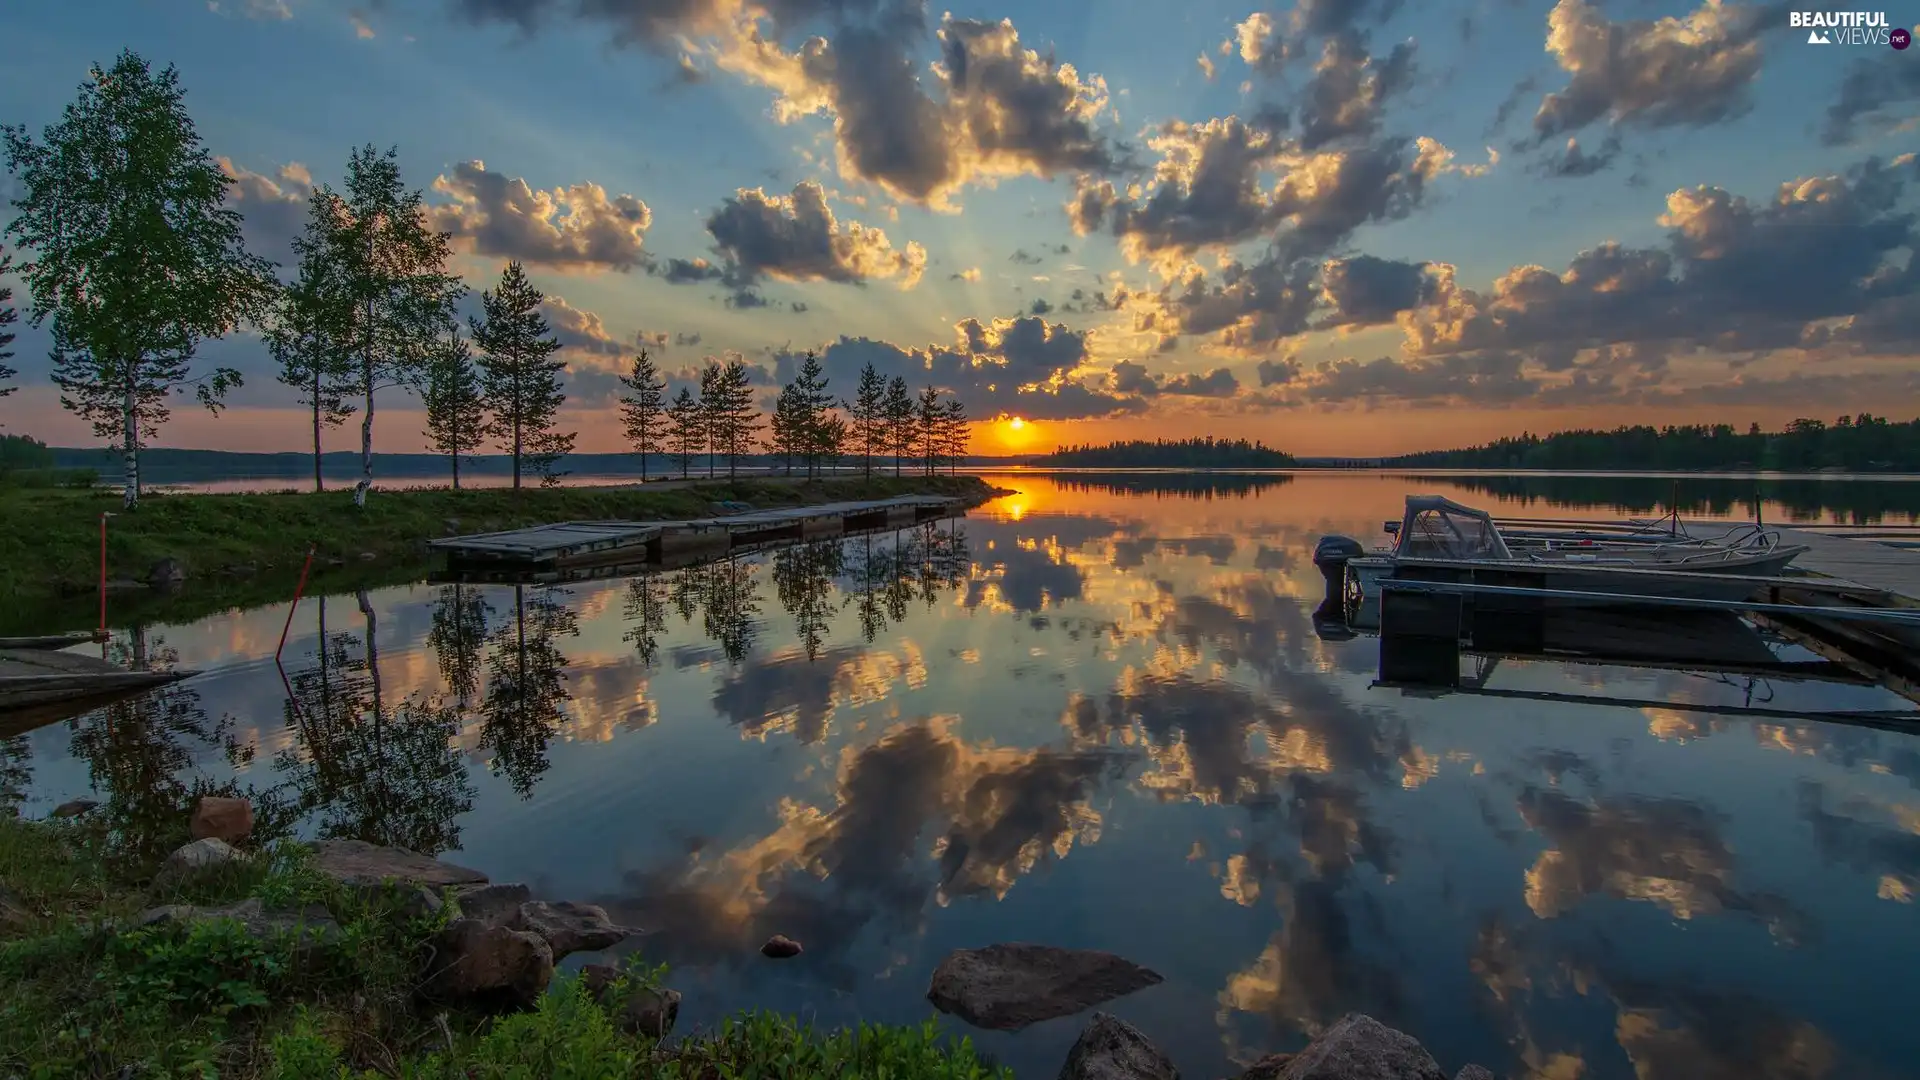 trees, viewes, clouds, Platform, reflection, Great Sunsets, lake, Boat